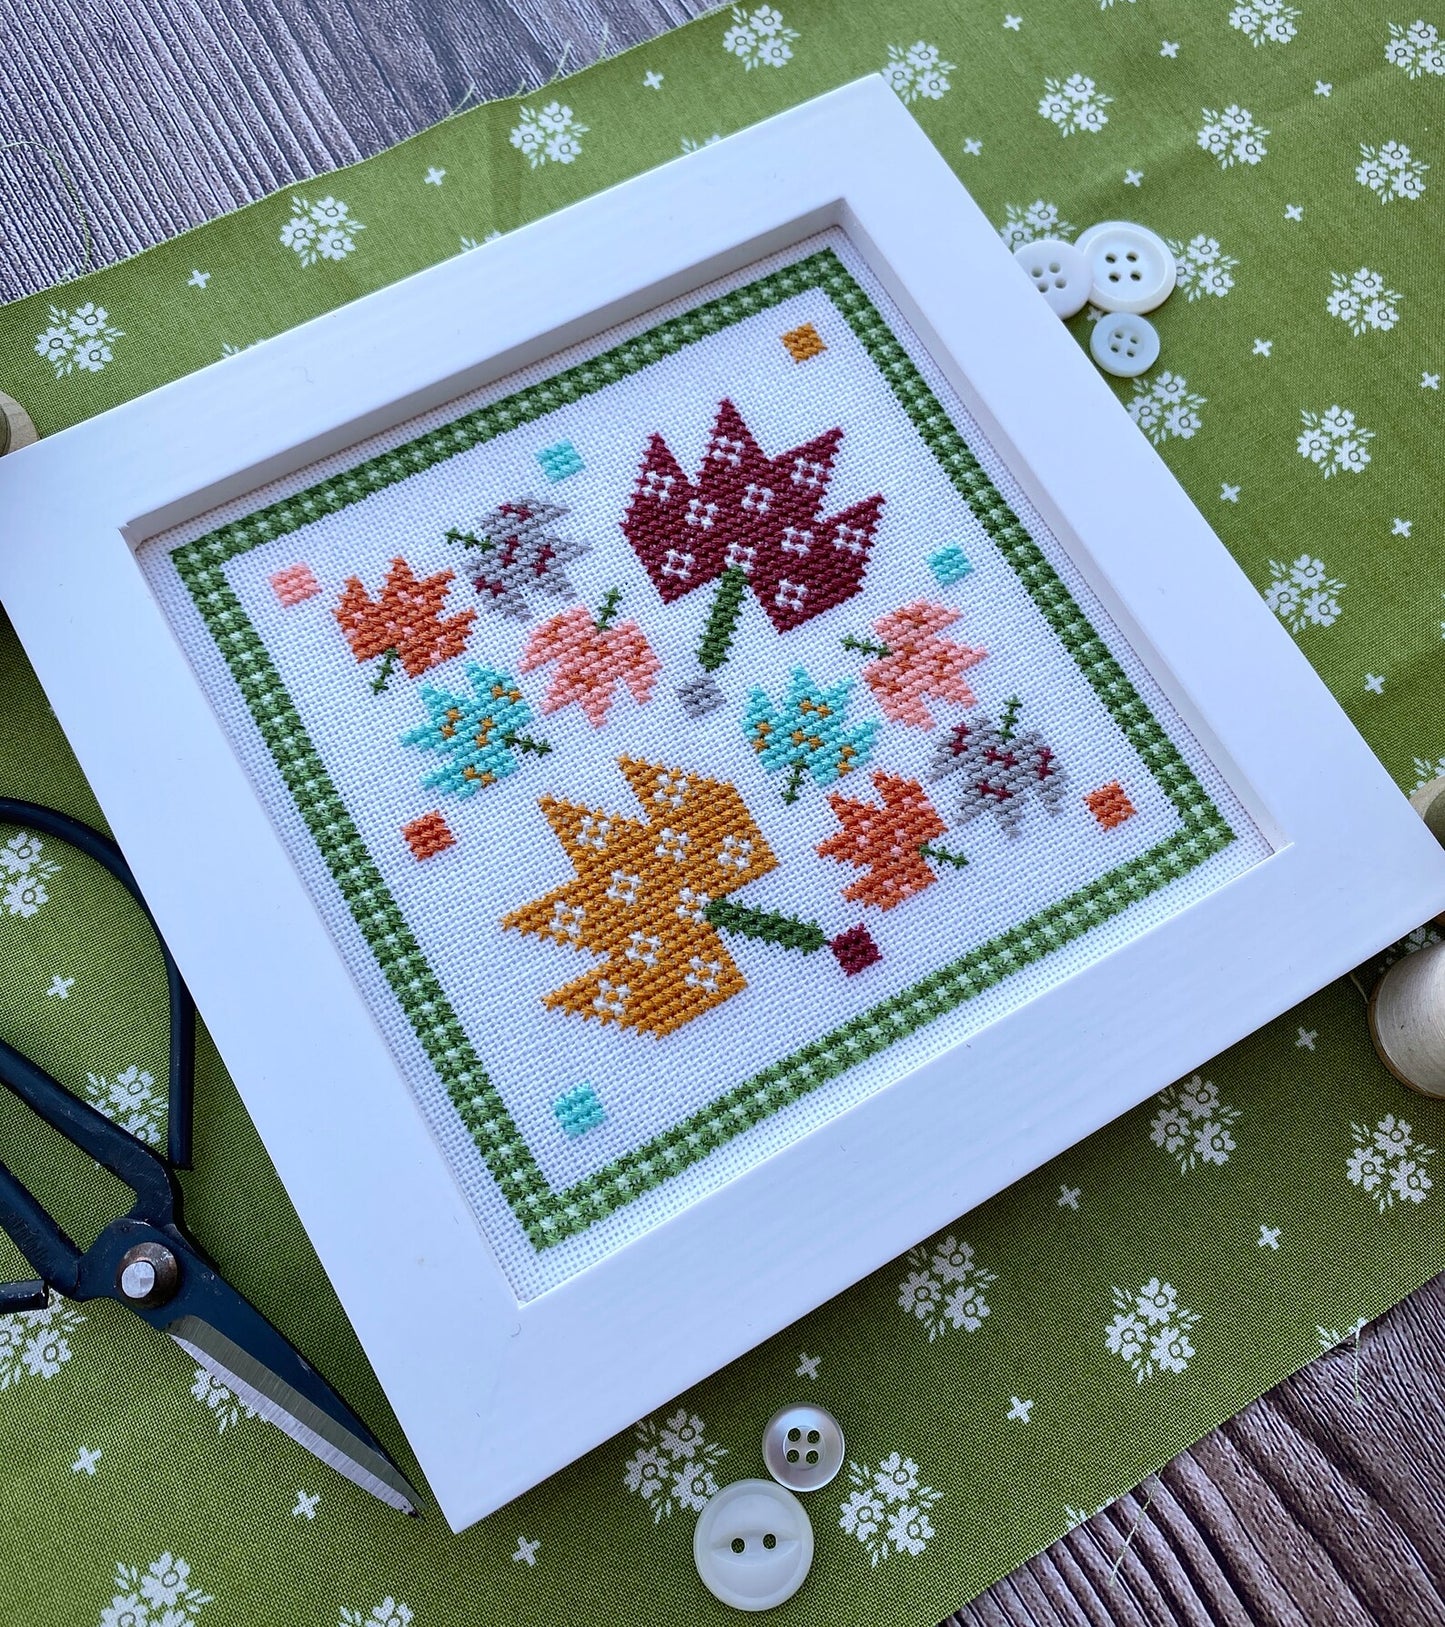 Maple Sky Mini Cross Stitch Pattern by Count Your Stitches Designs